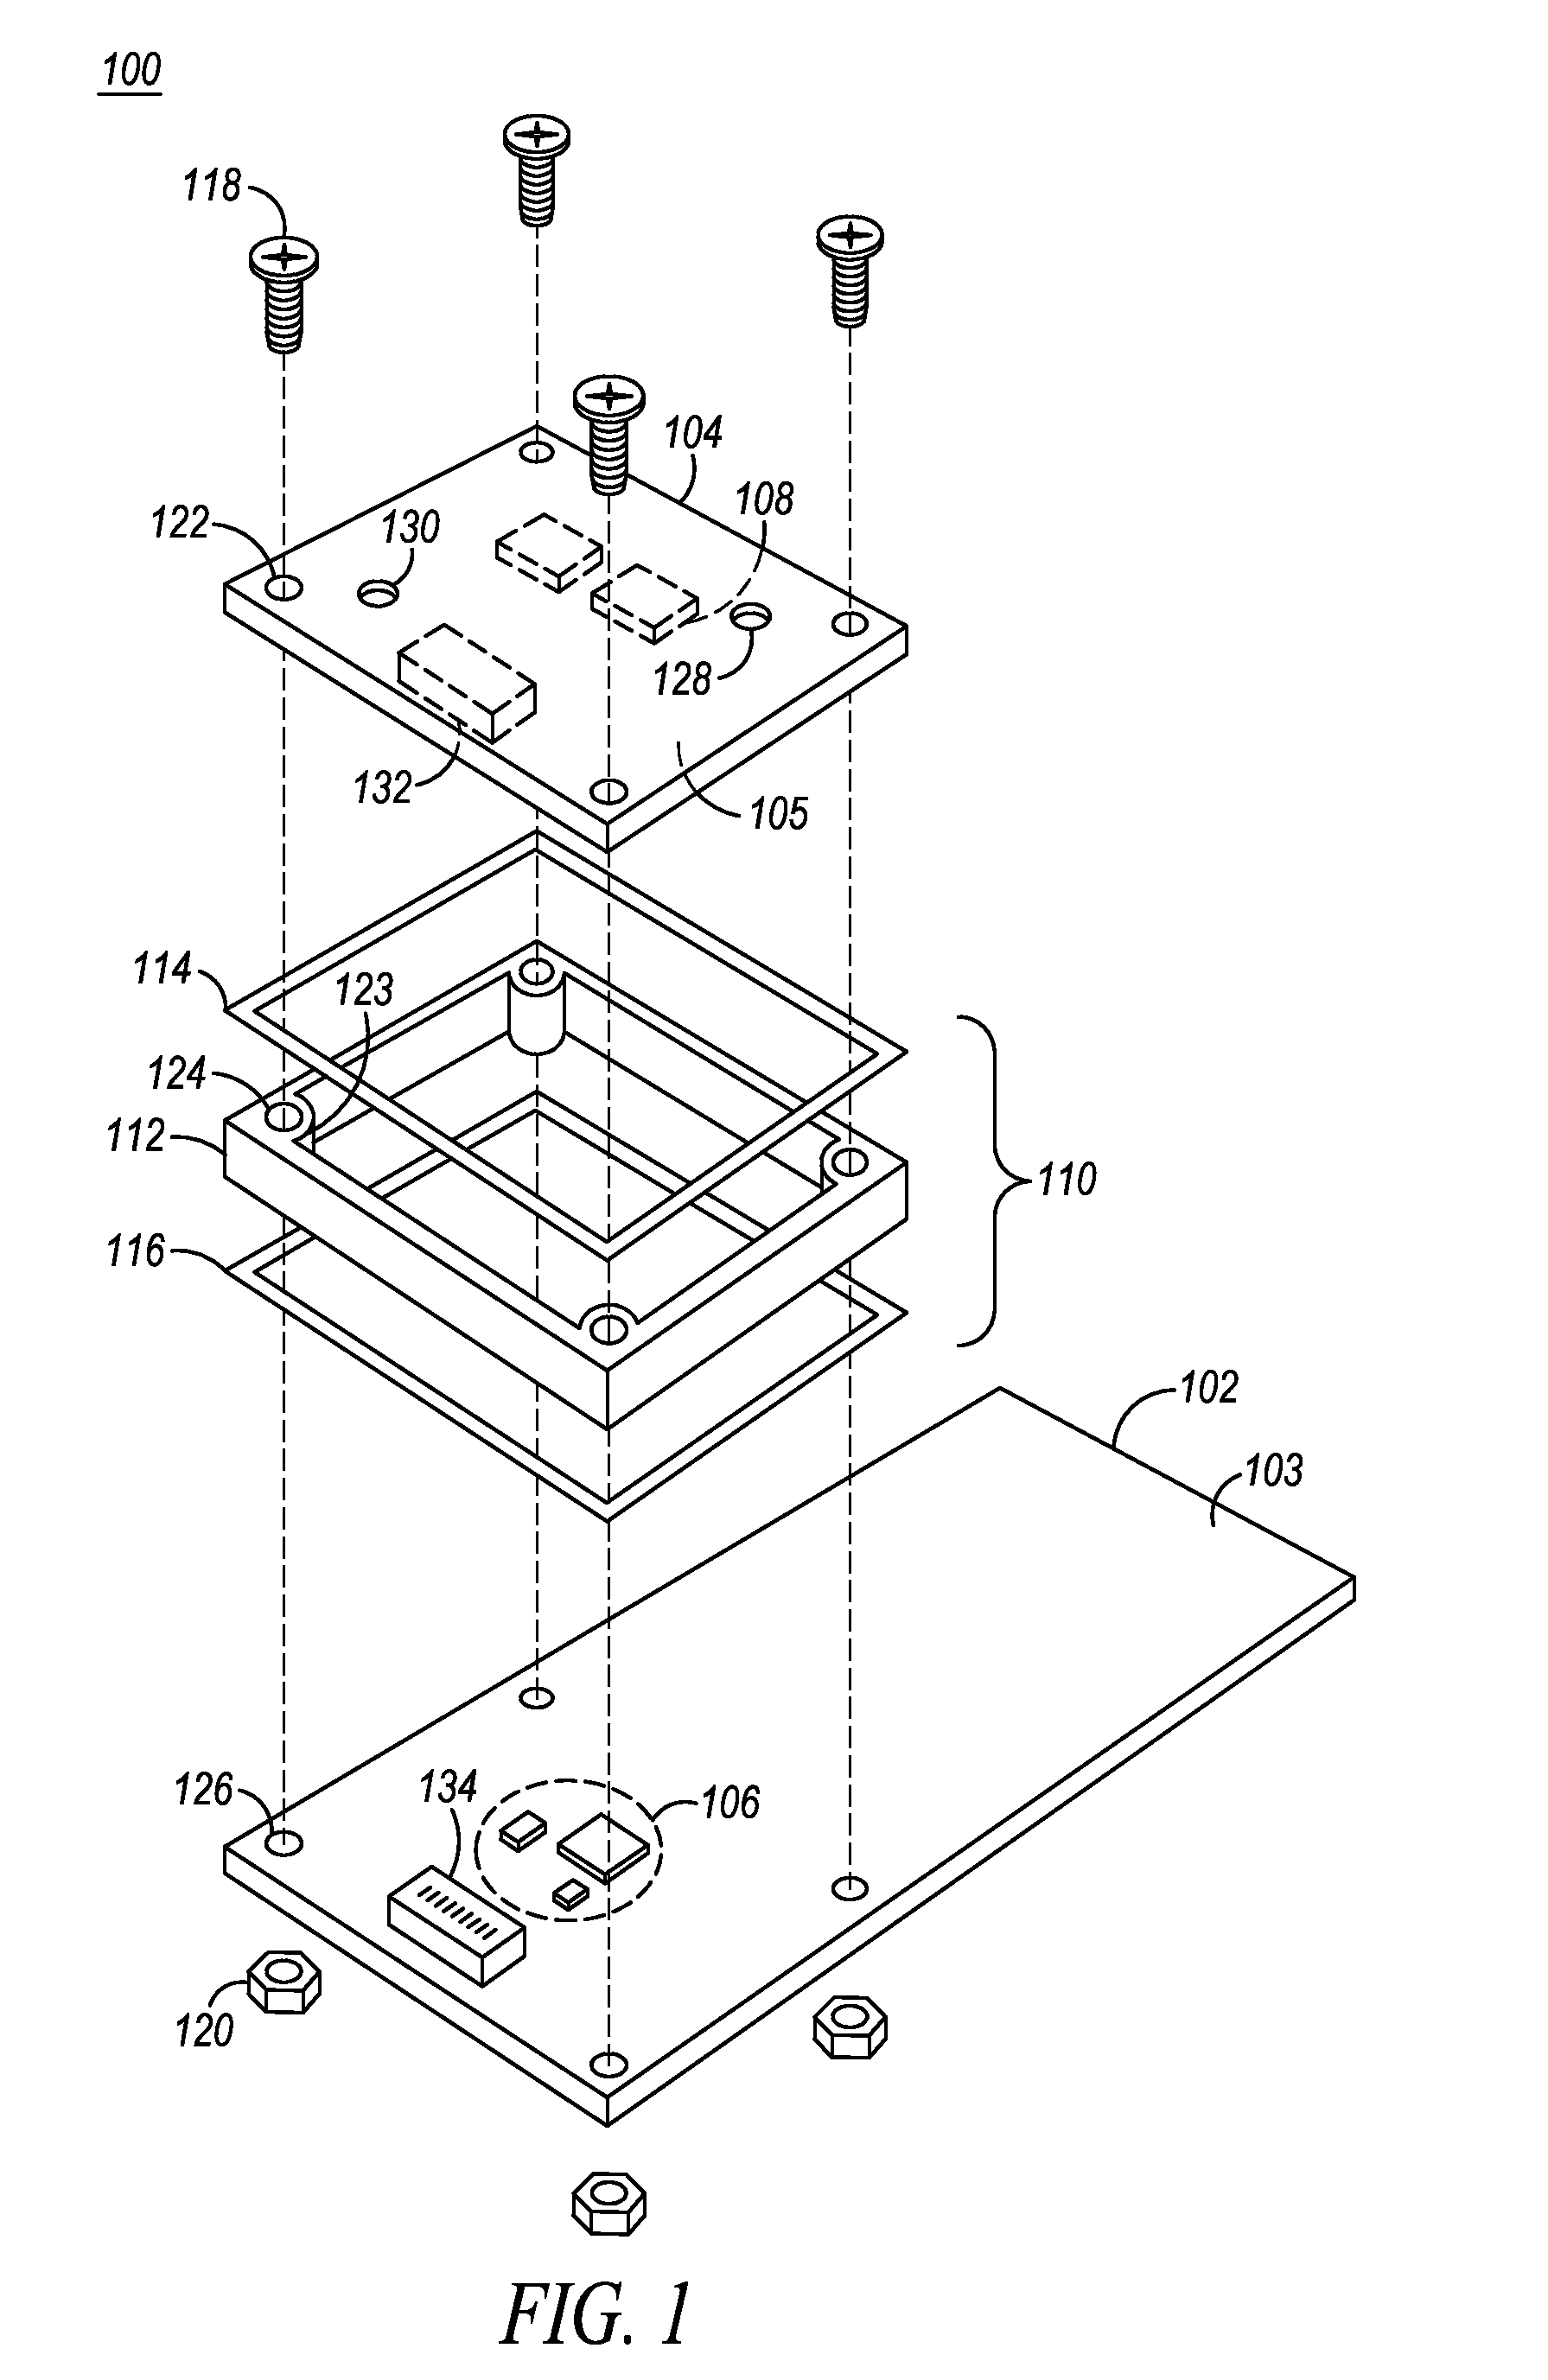 Method and apparatus for intrinsically safe circuit board arrangement for portable electronic devices